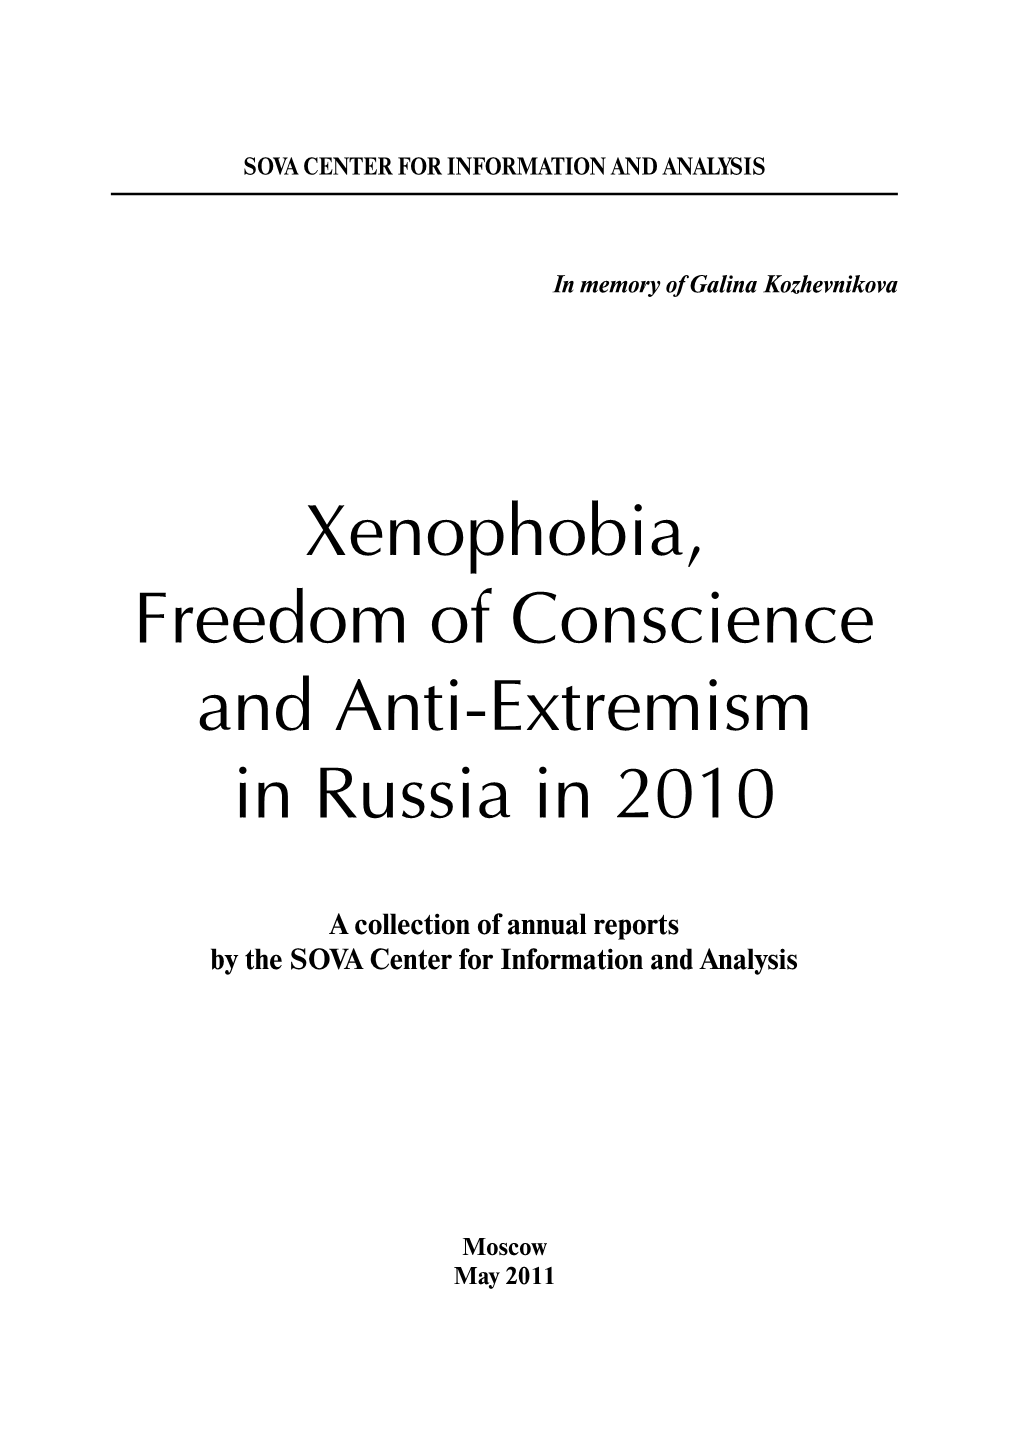 Xenophobia, Freedom of Conscience and Anti-Extremism in Russia in 2010